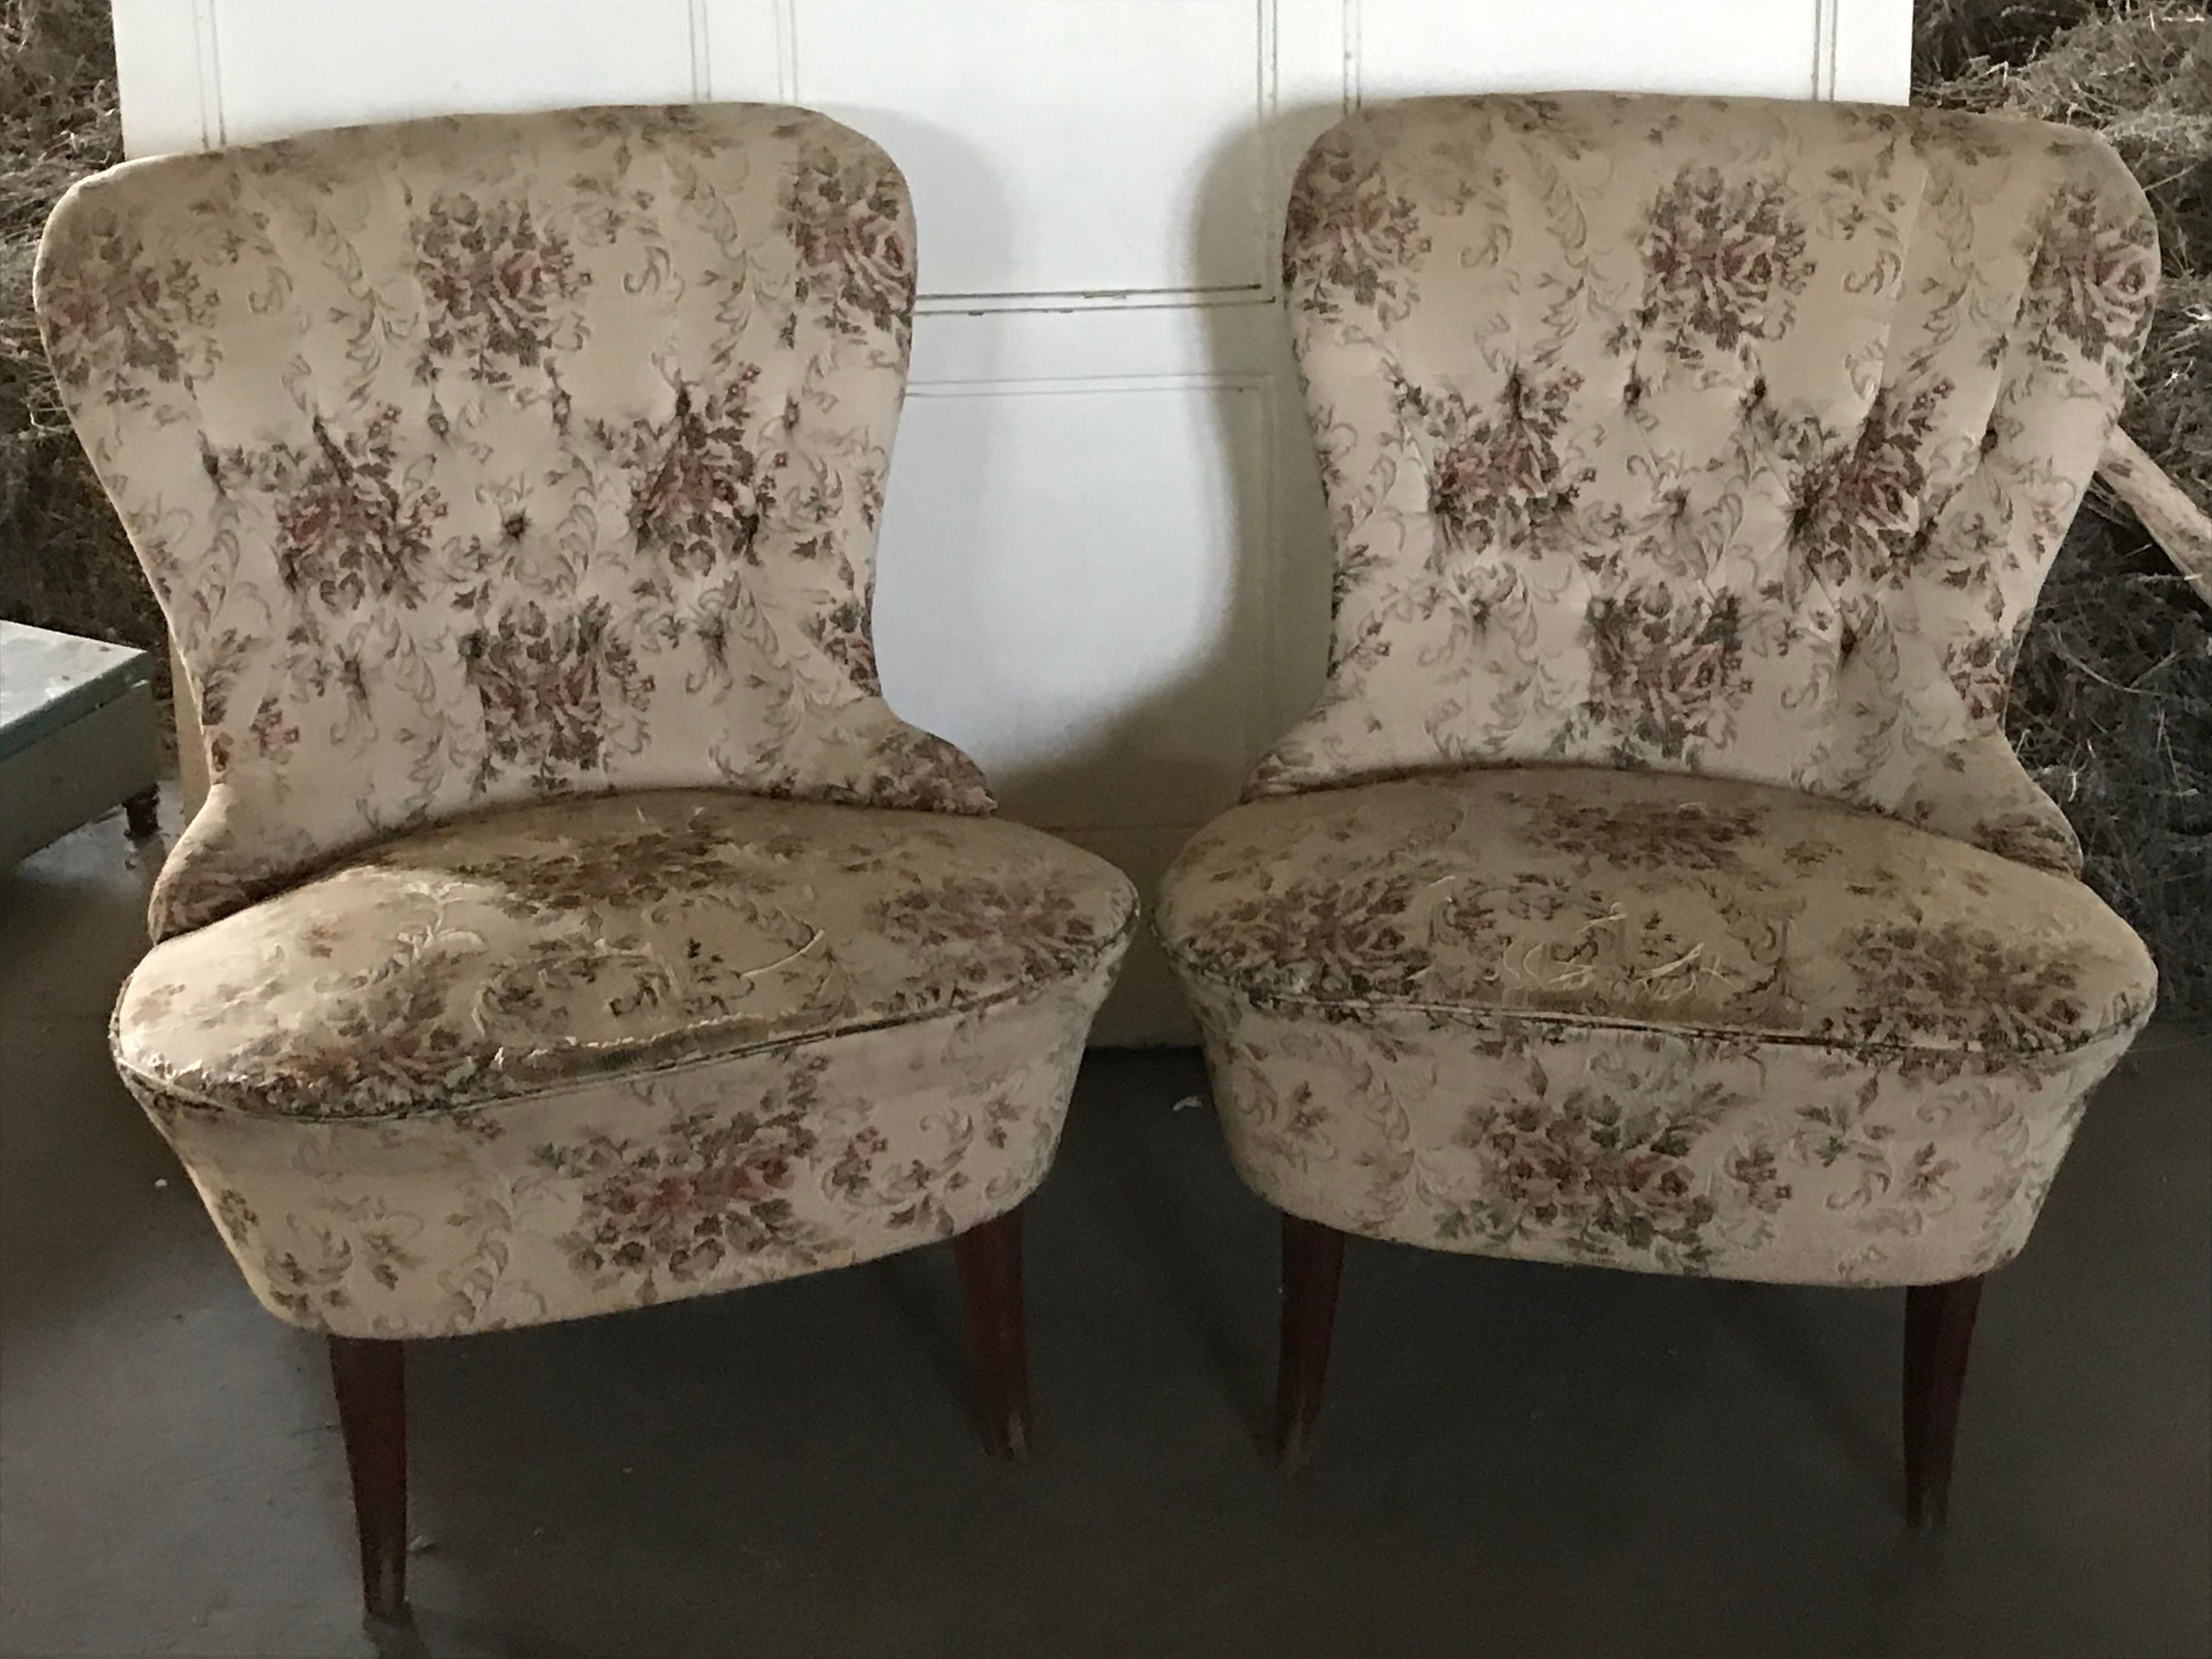 Pair of vintage chairs in original floral fabric
Overall the chairs are in very good condition, with solid frames.
Little mistake, look at the photos
2 more in stock.